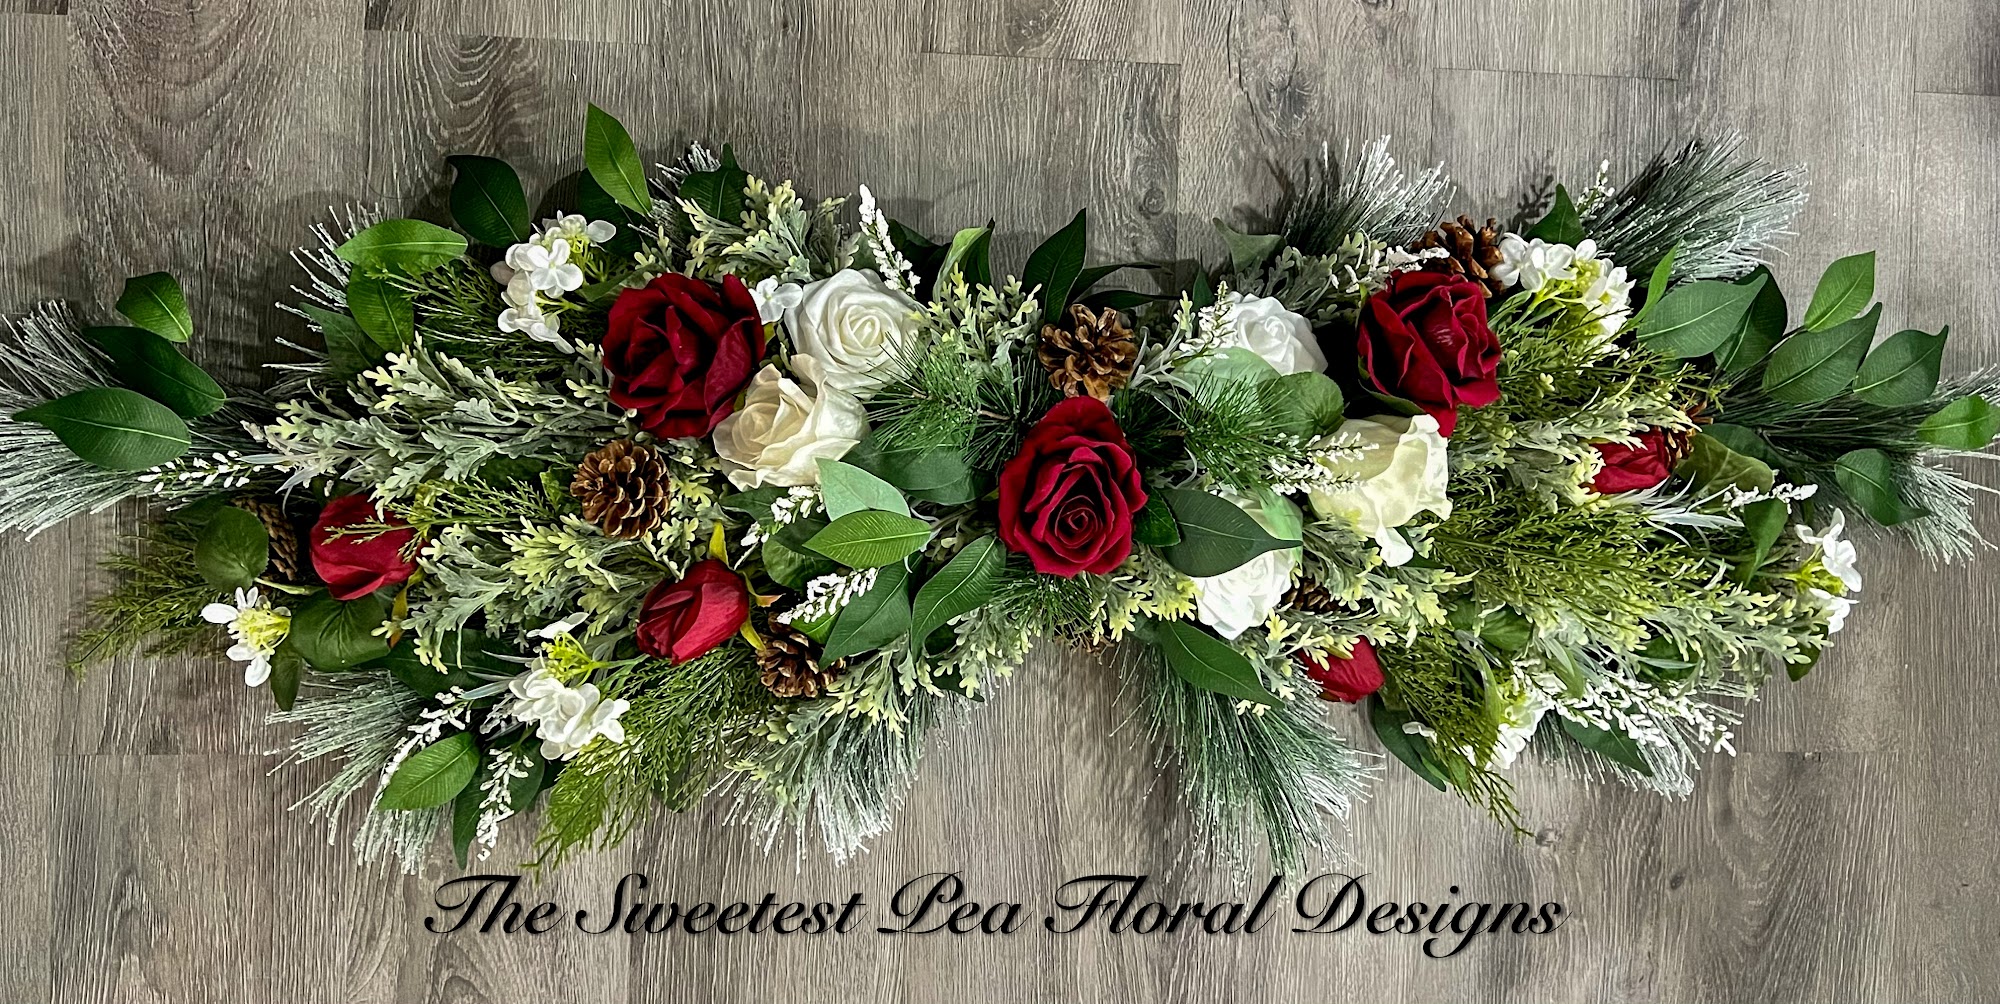 The Sweetest Pea Floral Designs 23 Linden St, Westover West Virginia 26501